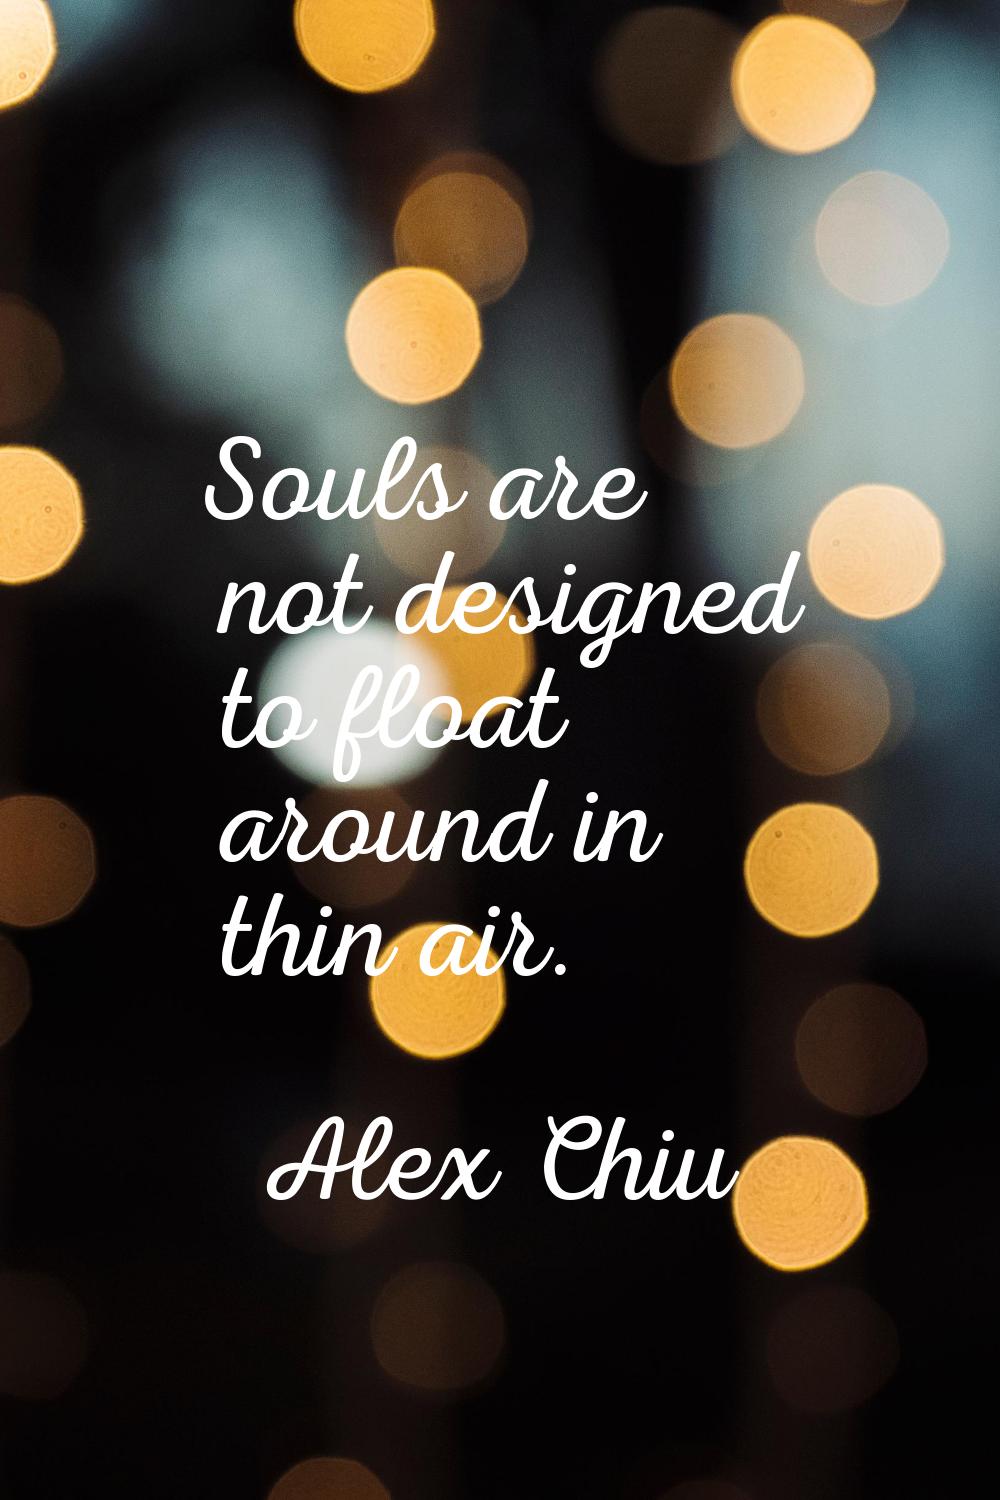 Souls are not designed to float around in thin air.